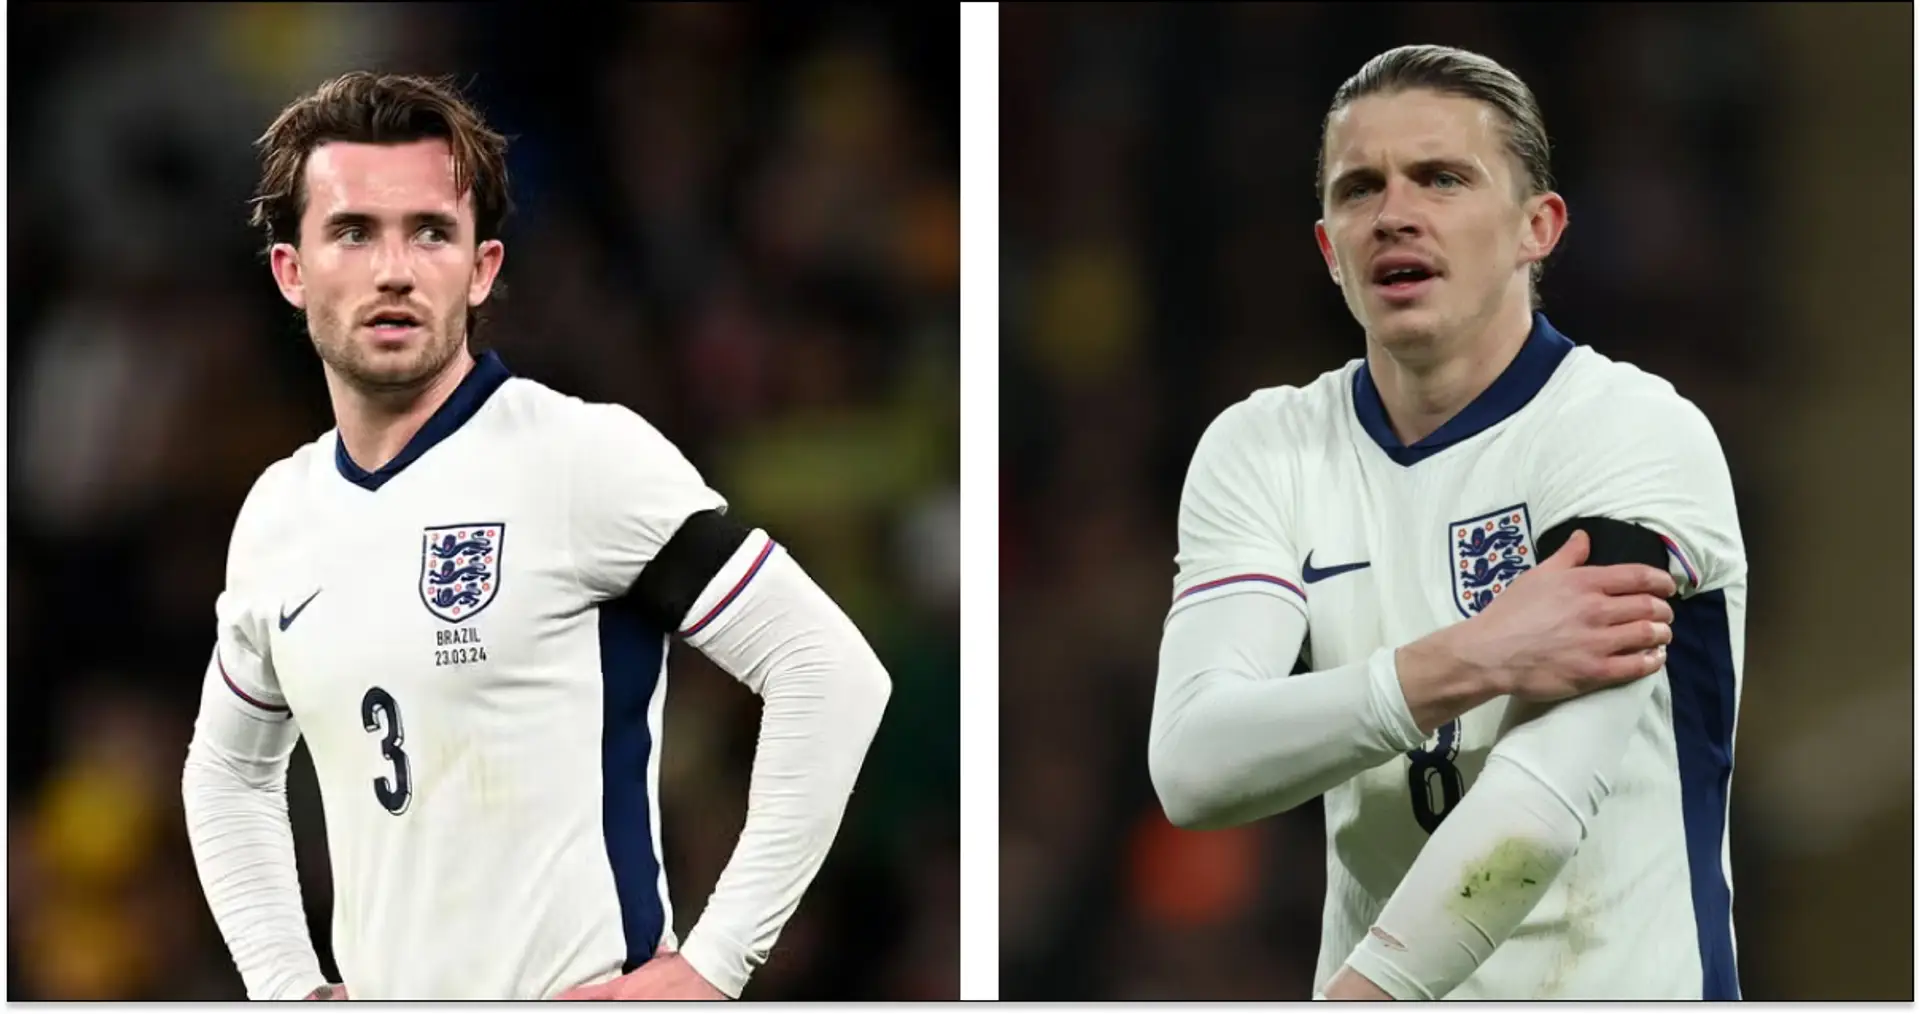 Gallagher & Chilwell feature for England, Palmer not in matchday squad